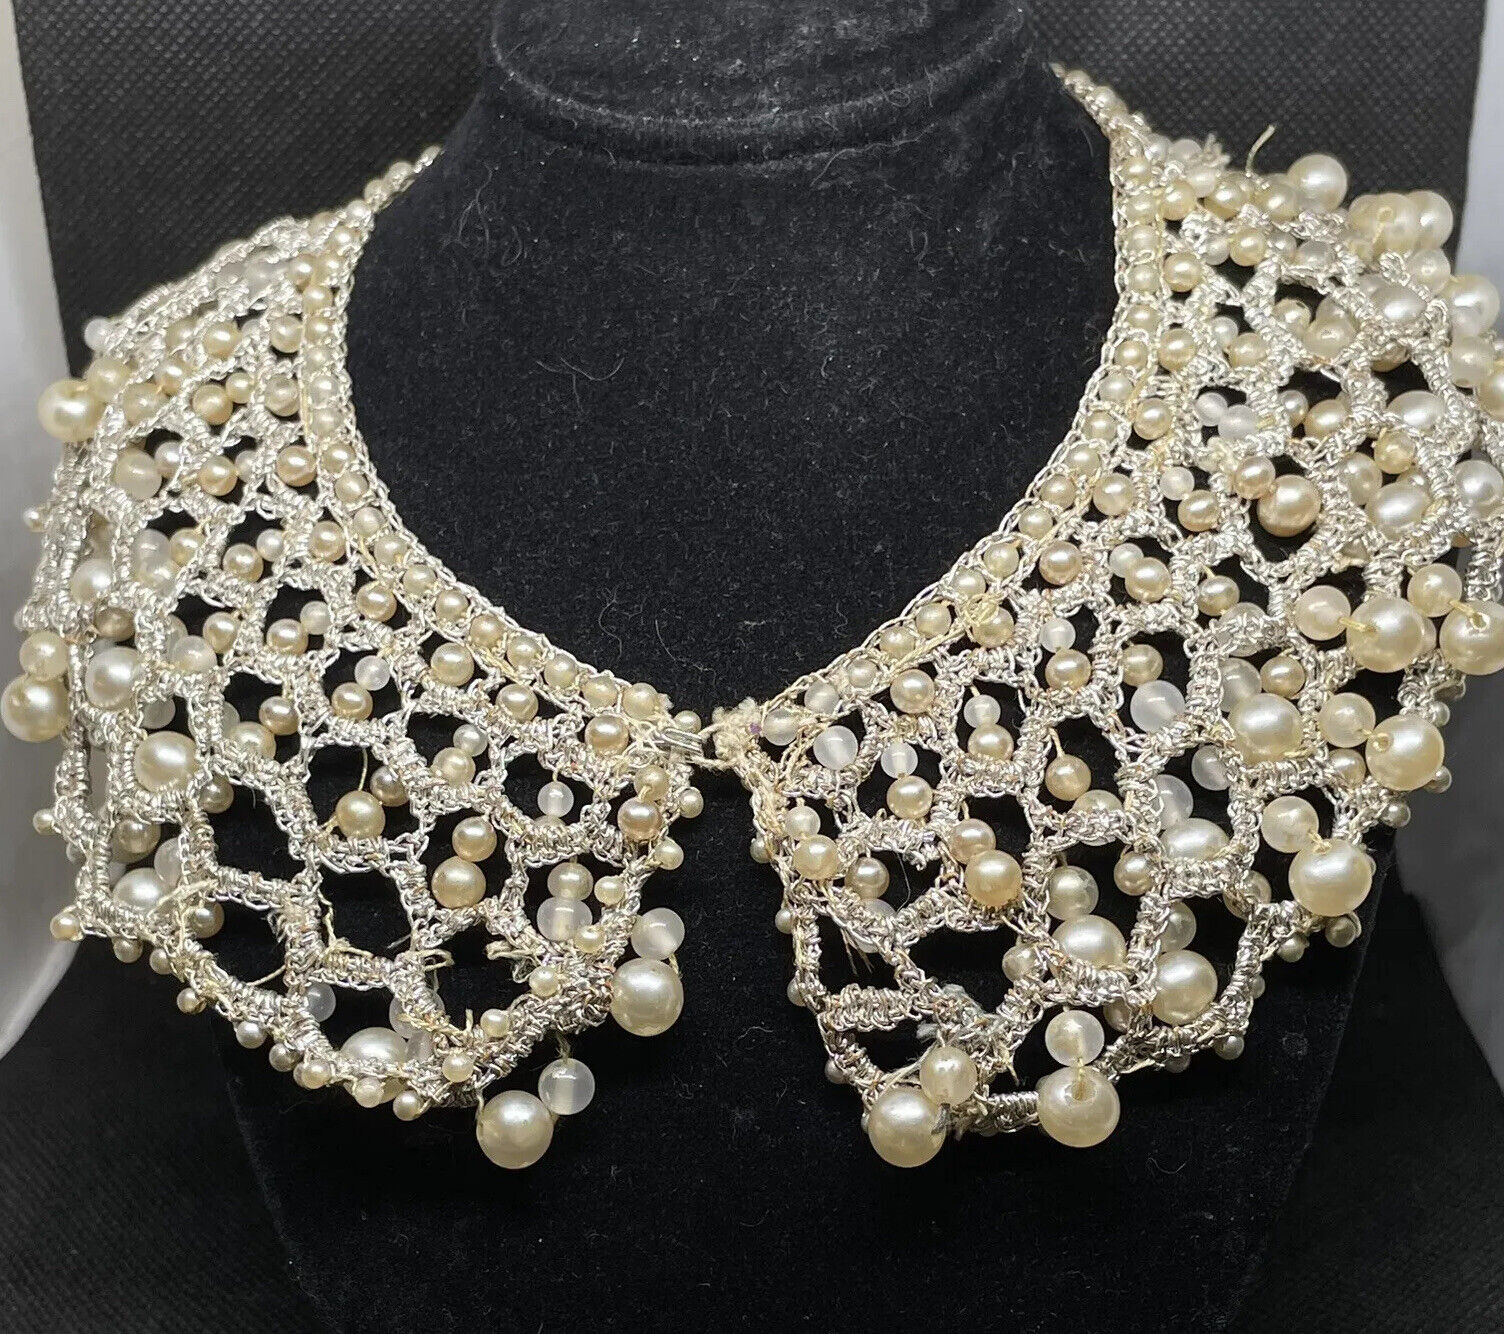 Antique Victorian Crochet Glass Pearl Necklace Collar 1800 1900 Gold Satin